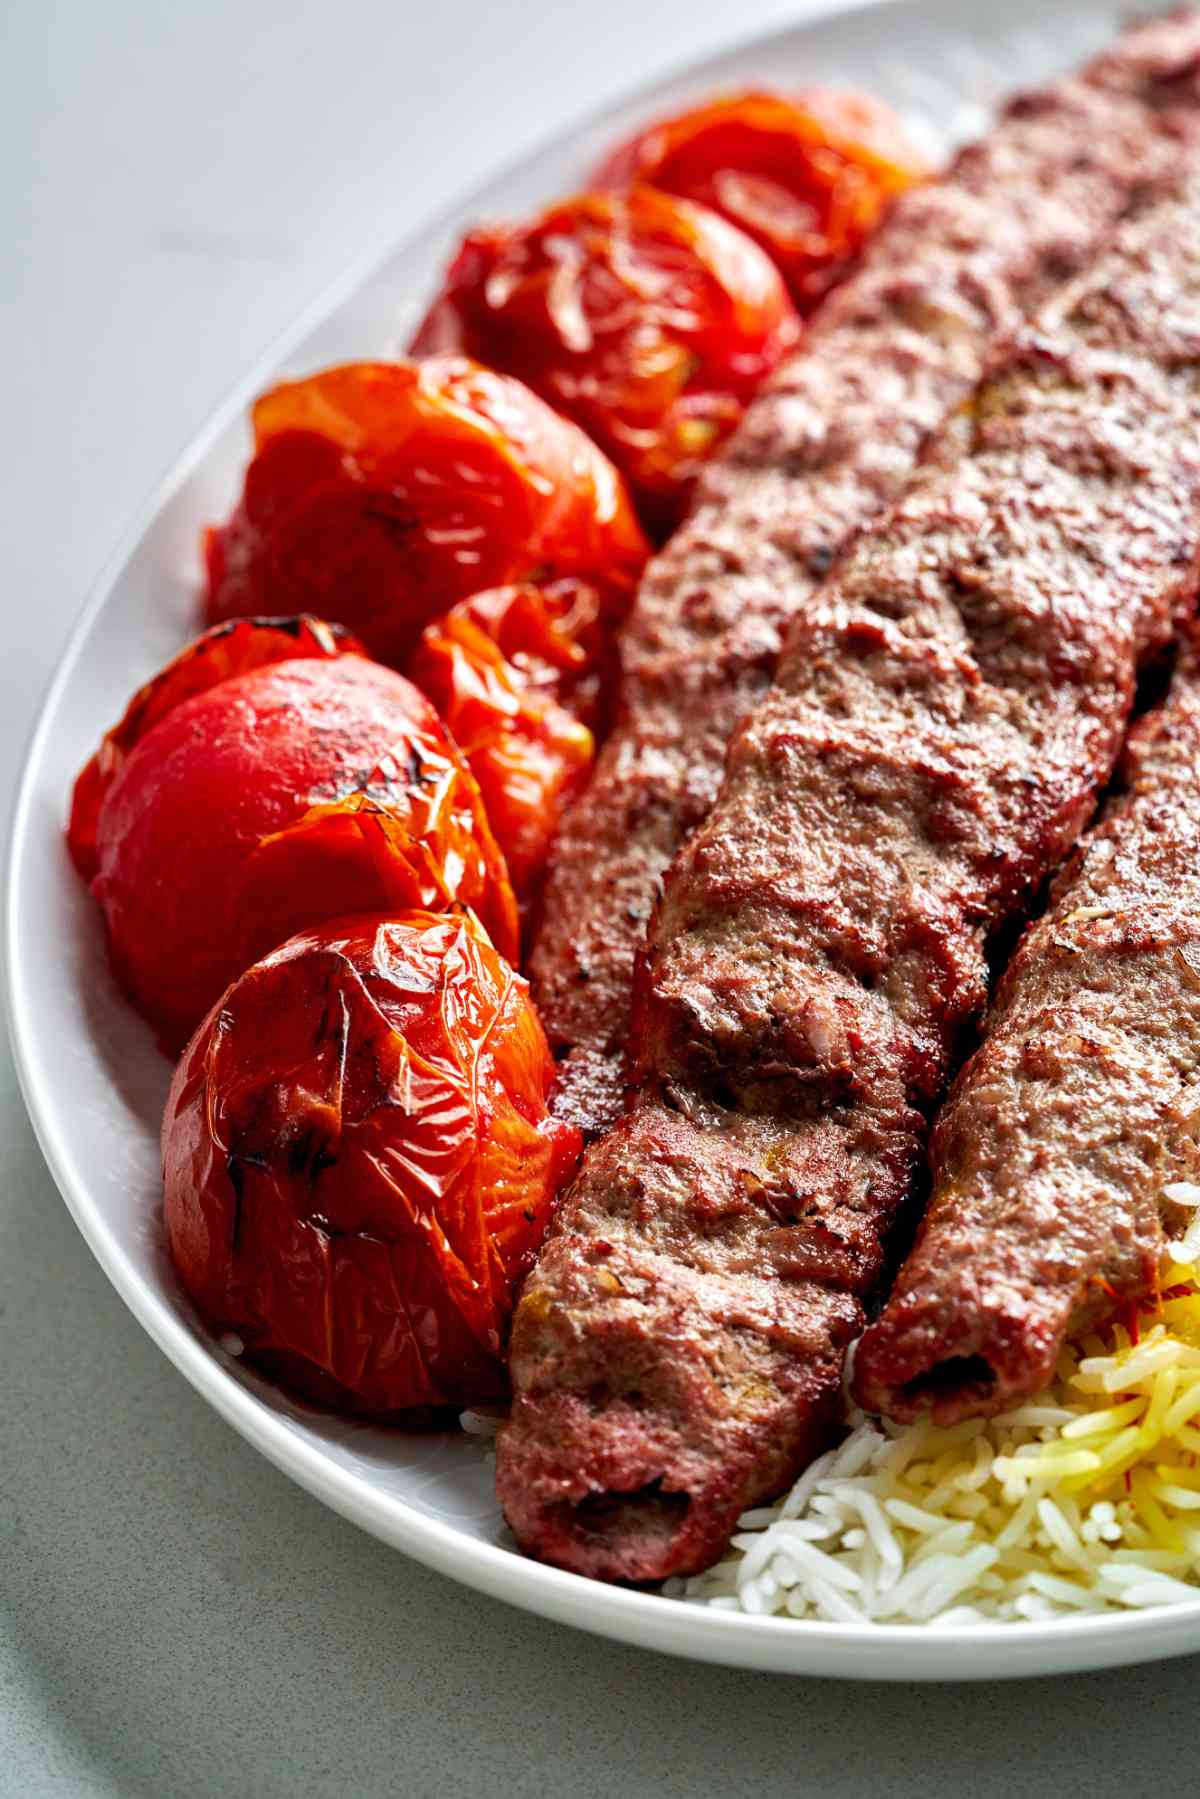 Meat kabobs on a plate with tomatoes.